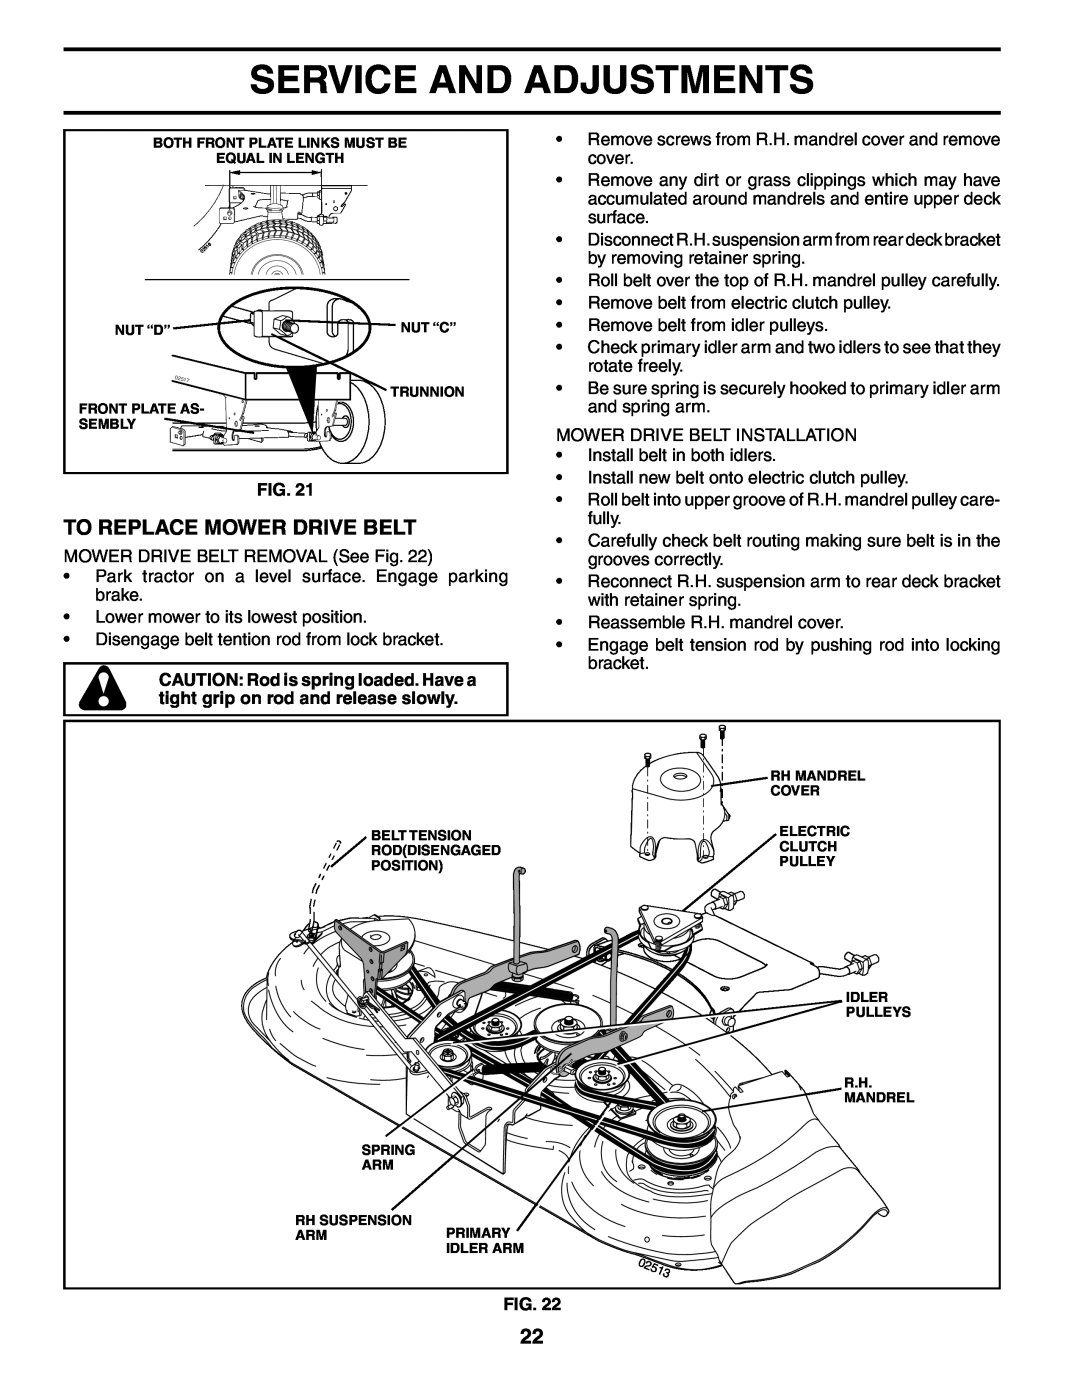 Poulan XT24H48YT manual To Replace Mower Drive Belt, Service And Adjustments, Nut “C” 